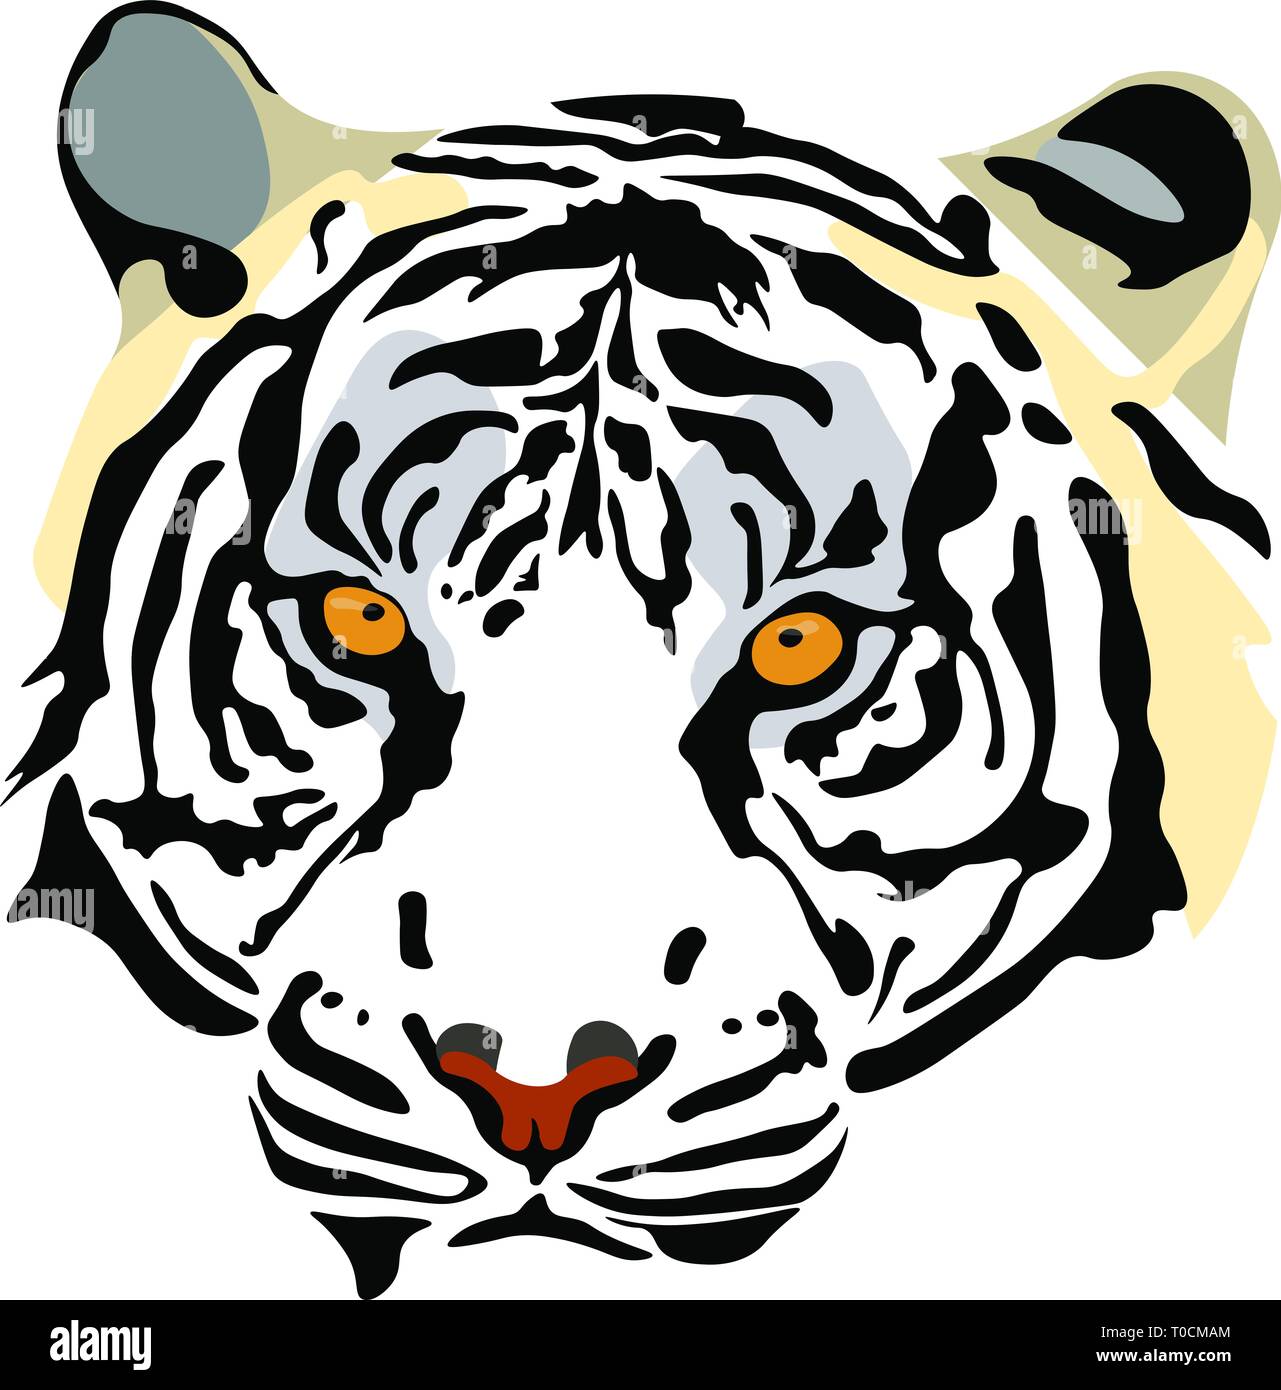 Illustration of a white tiger's head Stock Photo